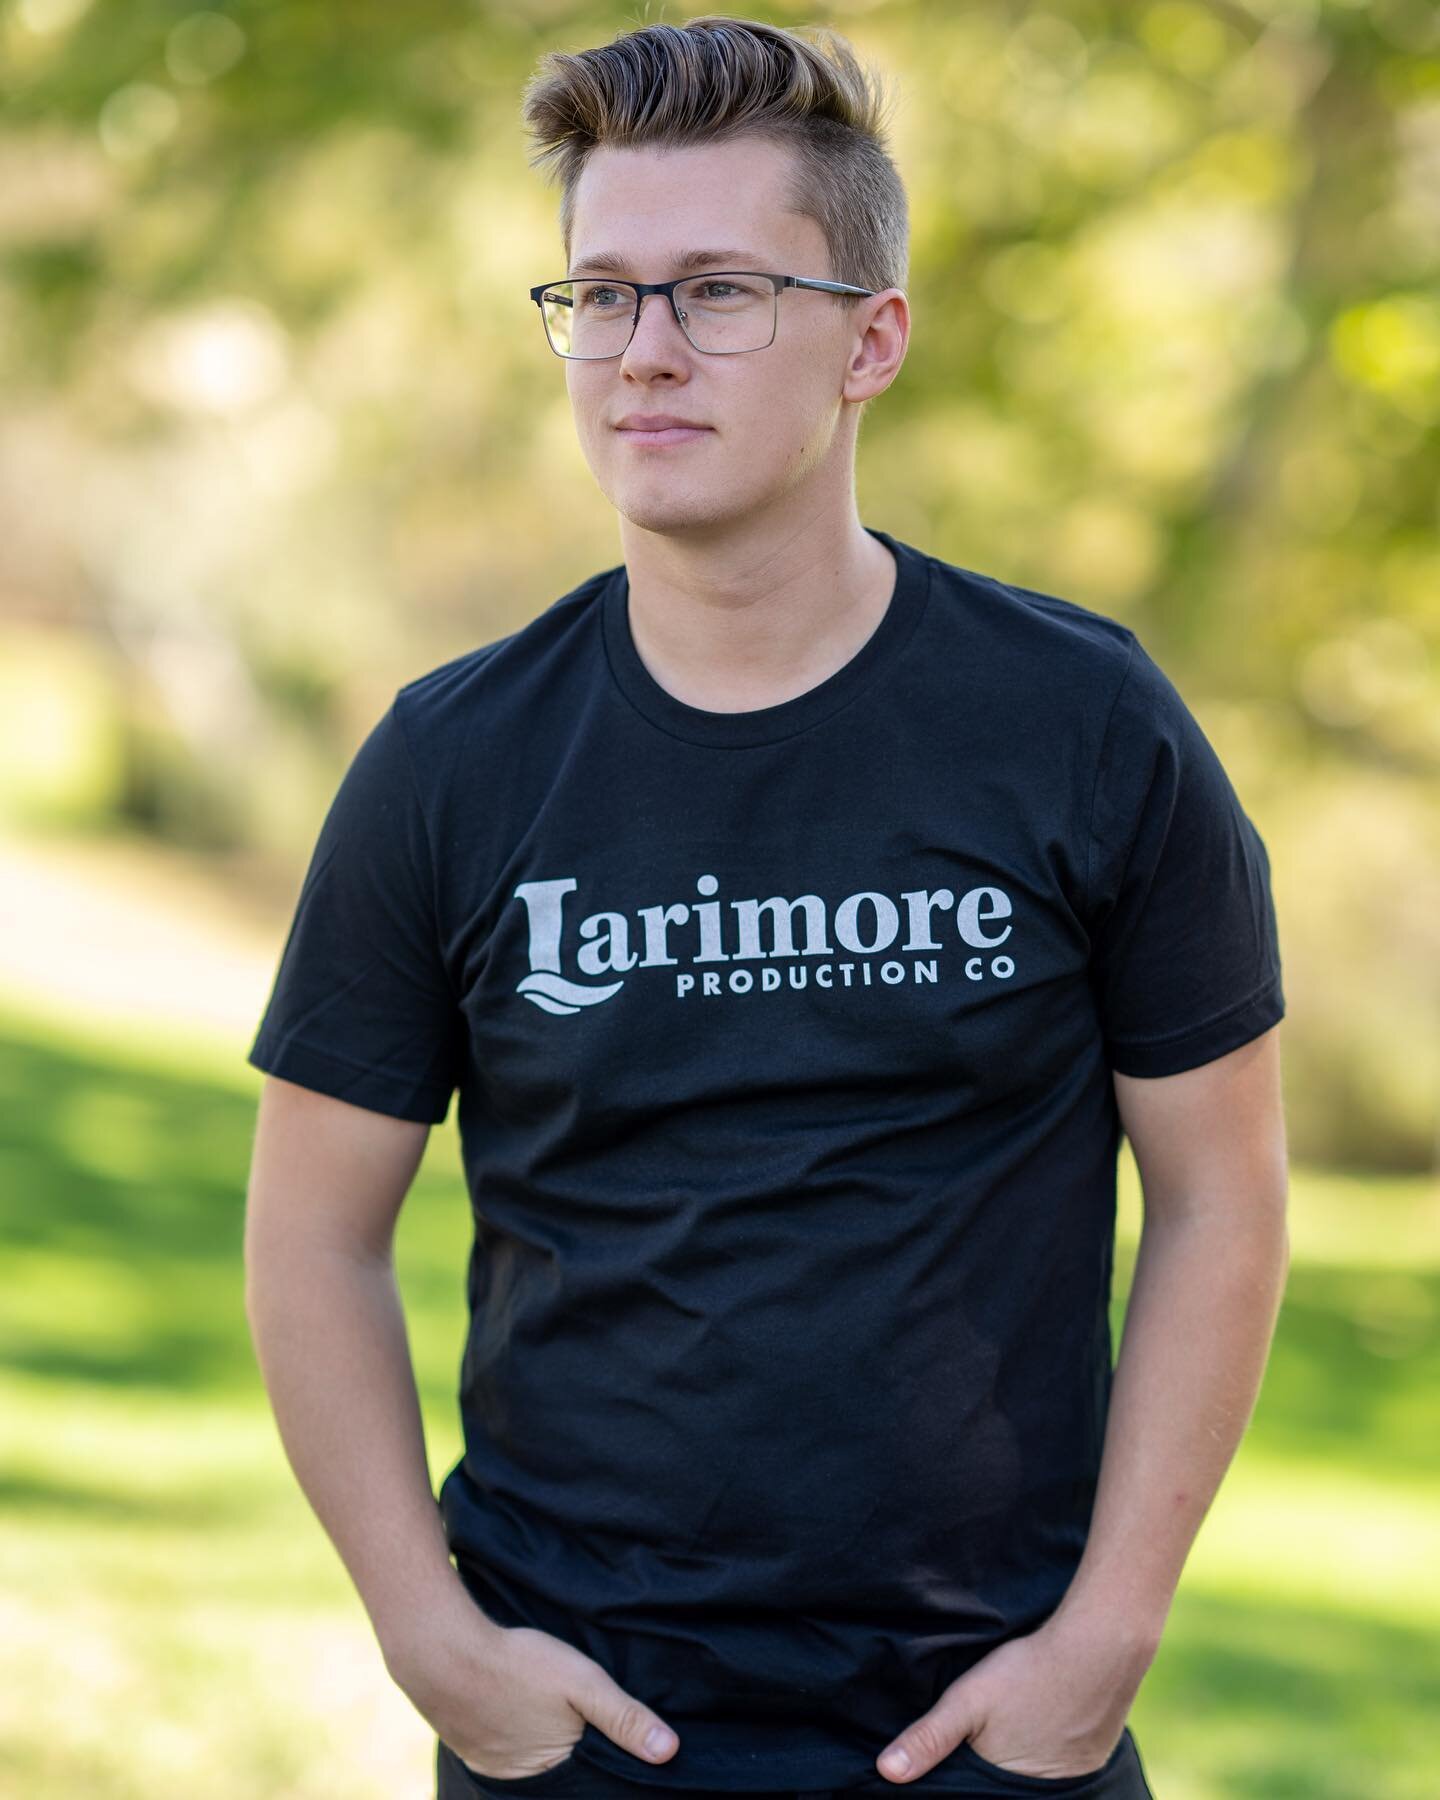 After rebranding a few months back, we really wanted to make some Larimore shirts. We are stoked to have some new Larimore gear, so make sure to keep an eye out around town 😀